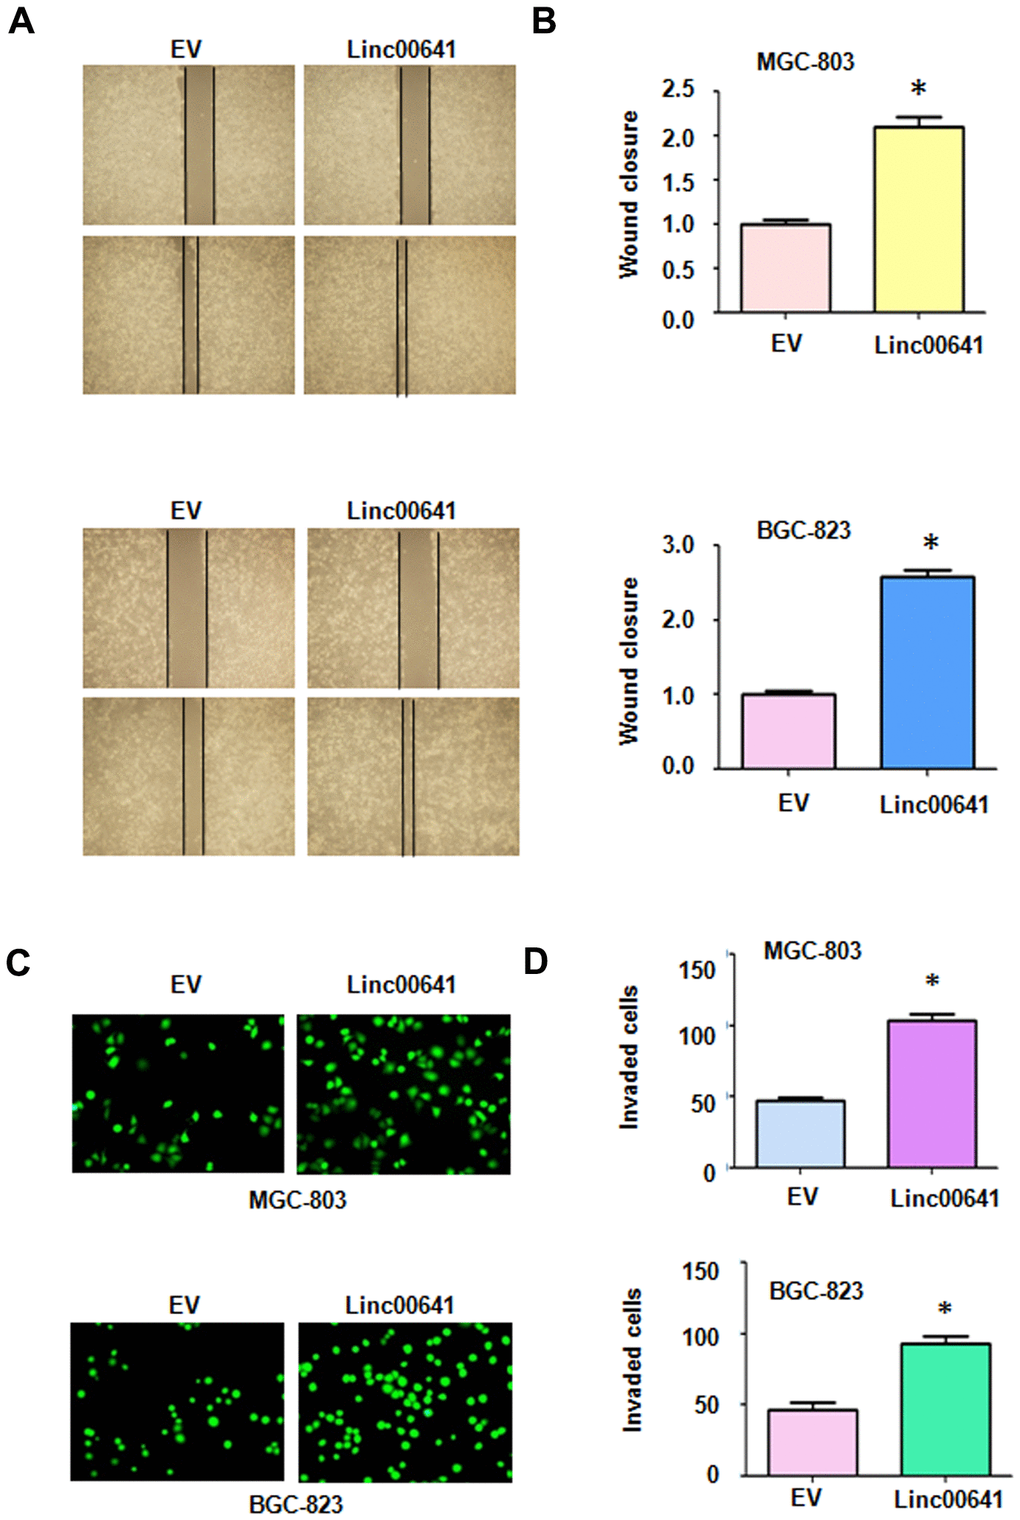 Effects of linc00641 overexpression on migration and invasion. (A) Wound healing assays were carried out to test the effects of linc00641 overexpression in gastric cancer cells. (B) Quantification of the migratory results.*P C) Invasive ability was measured by Transwell invasion assays. (D) Quantification of the invasiveness results.*P 